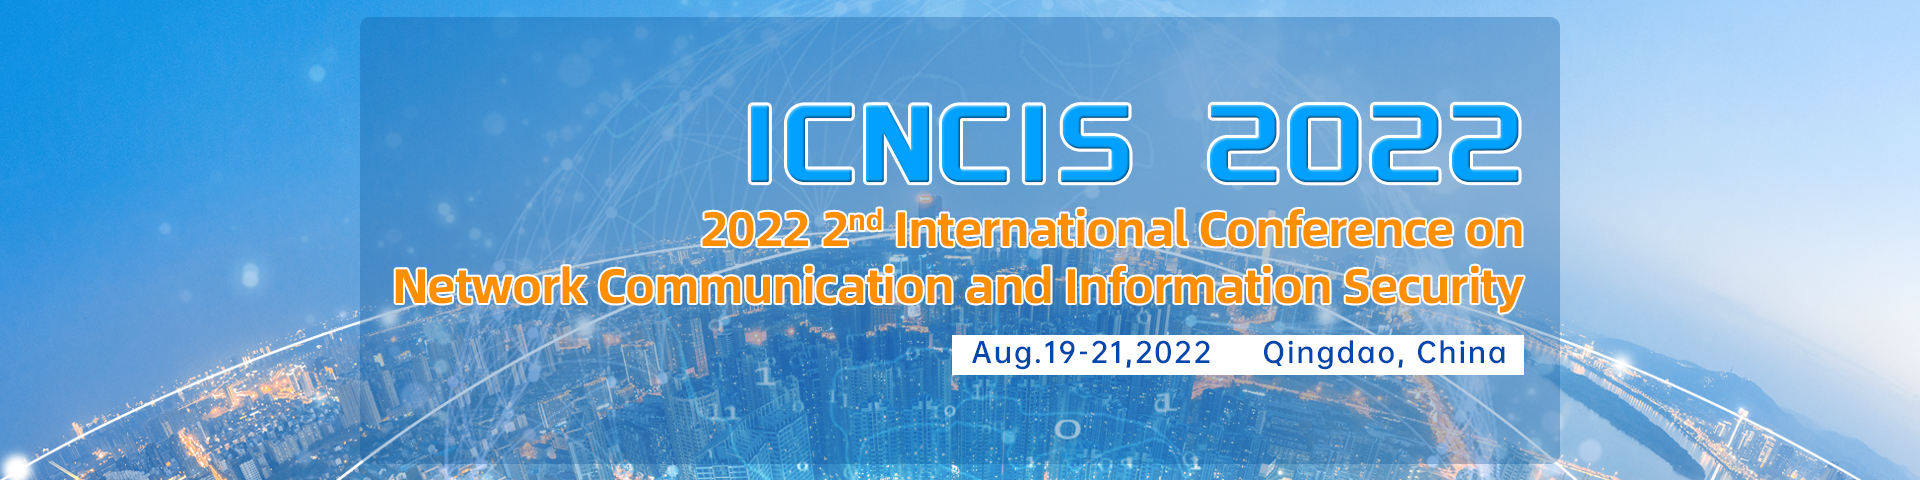 2022 2nd International Conference on Network Communication and Information Security (ICNCIS2022), Qingdao, Shandong, China